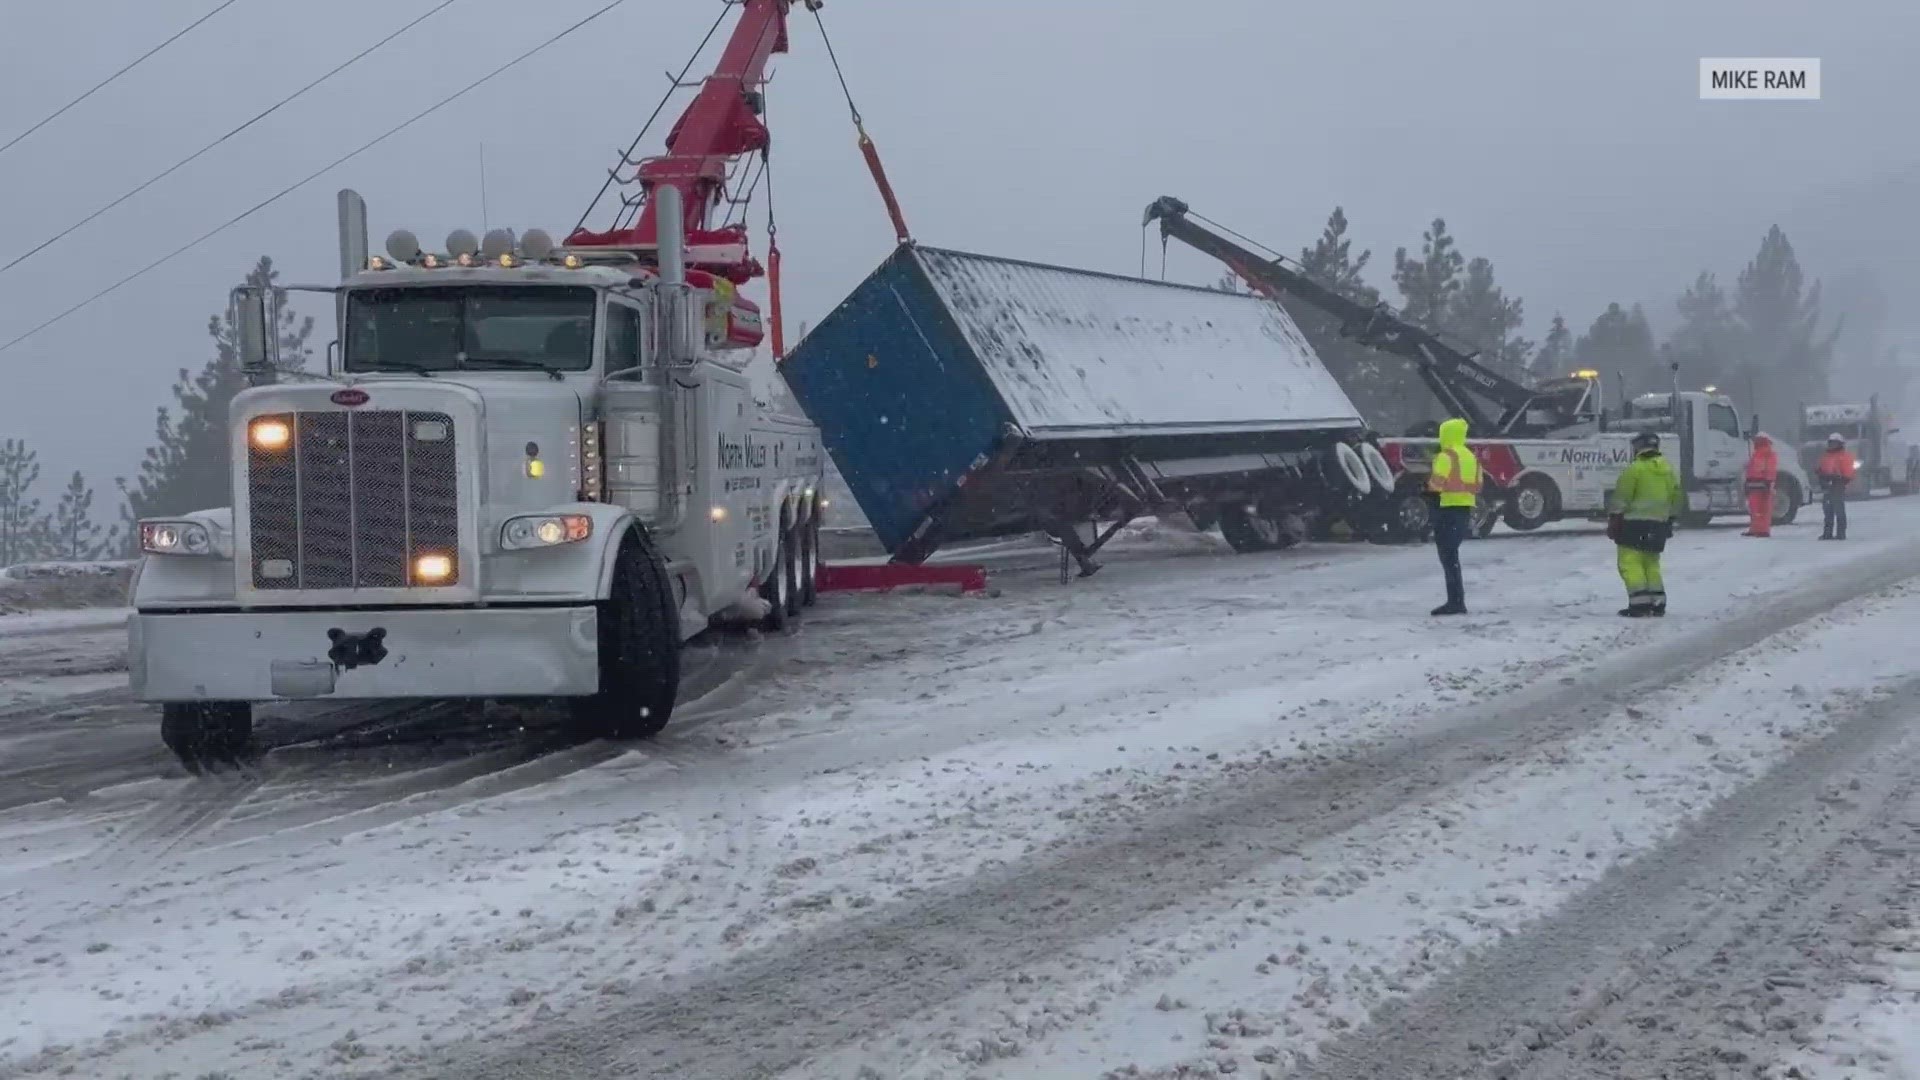 Tow truck drivers are giving it their all to help get drivers off of Interstate 80 due to blizzard conditions.